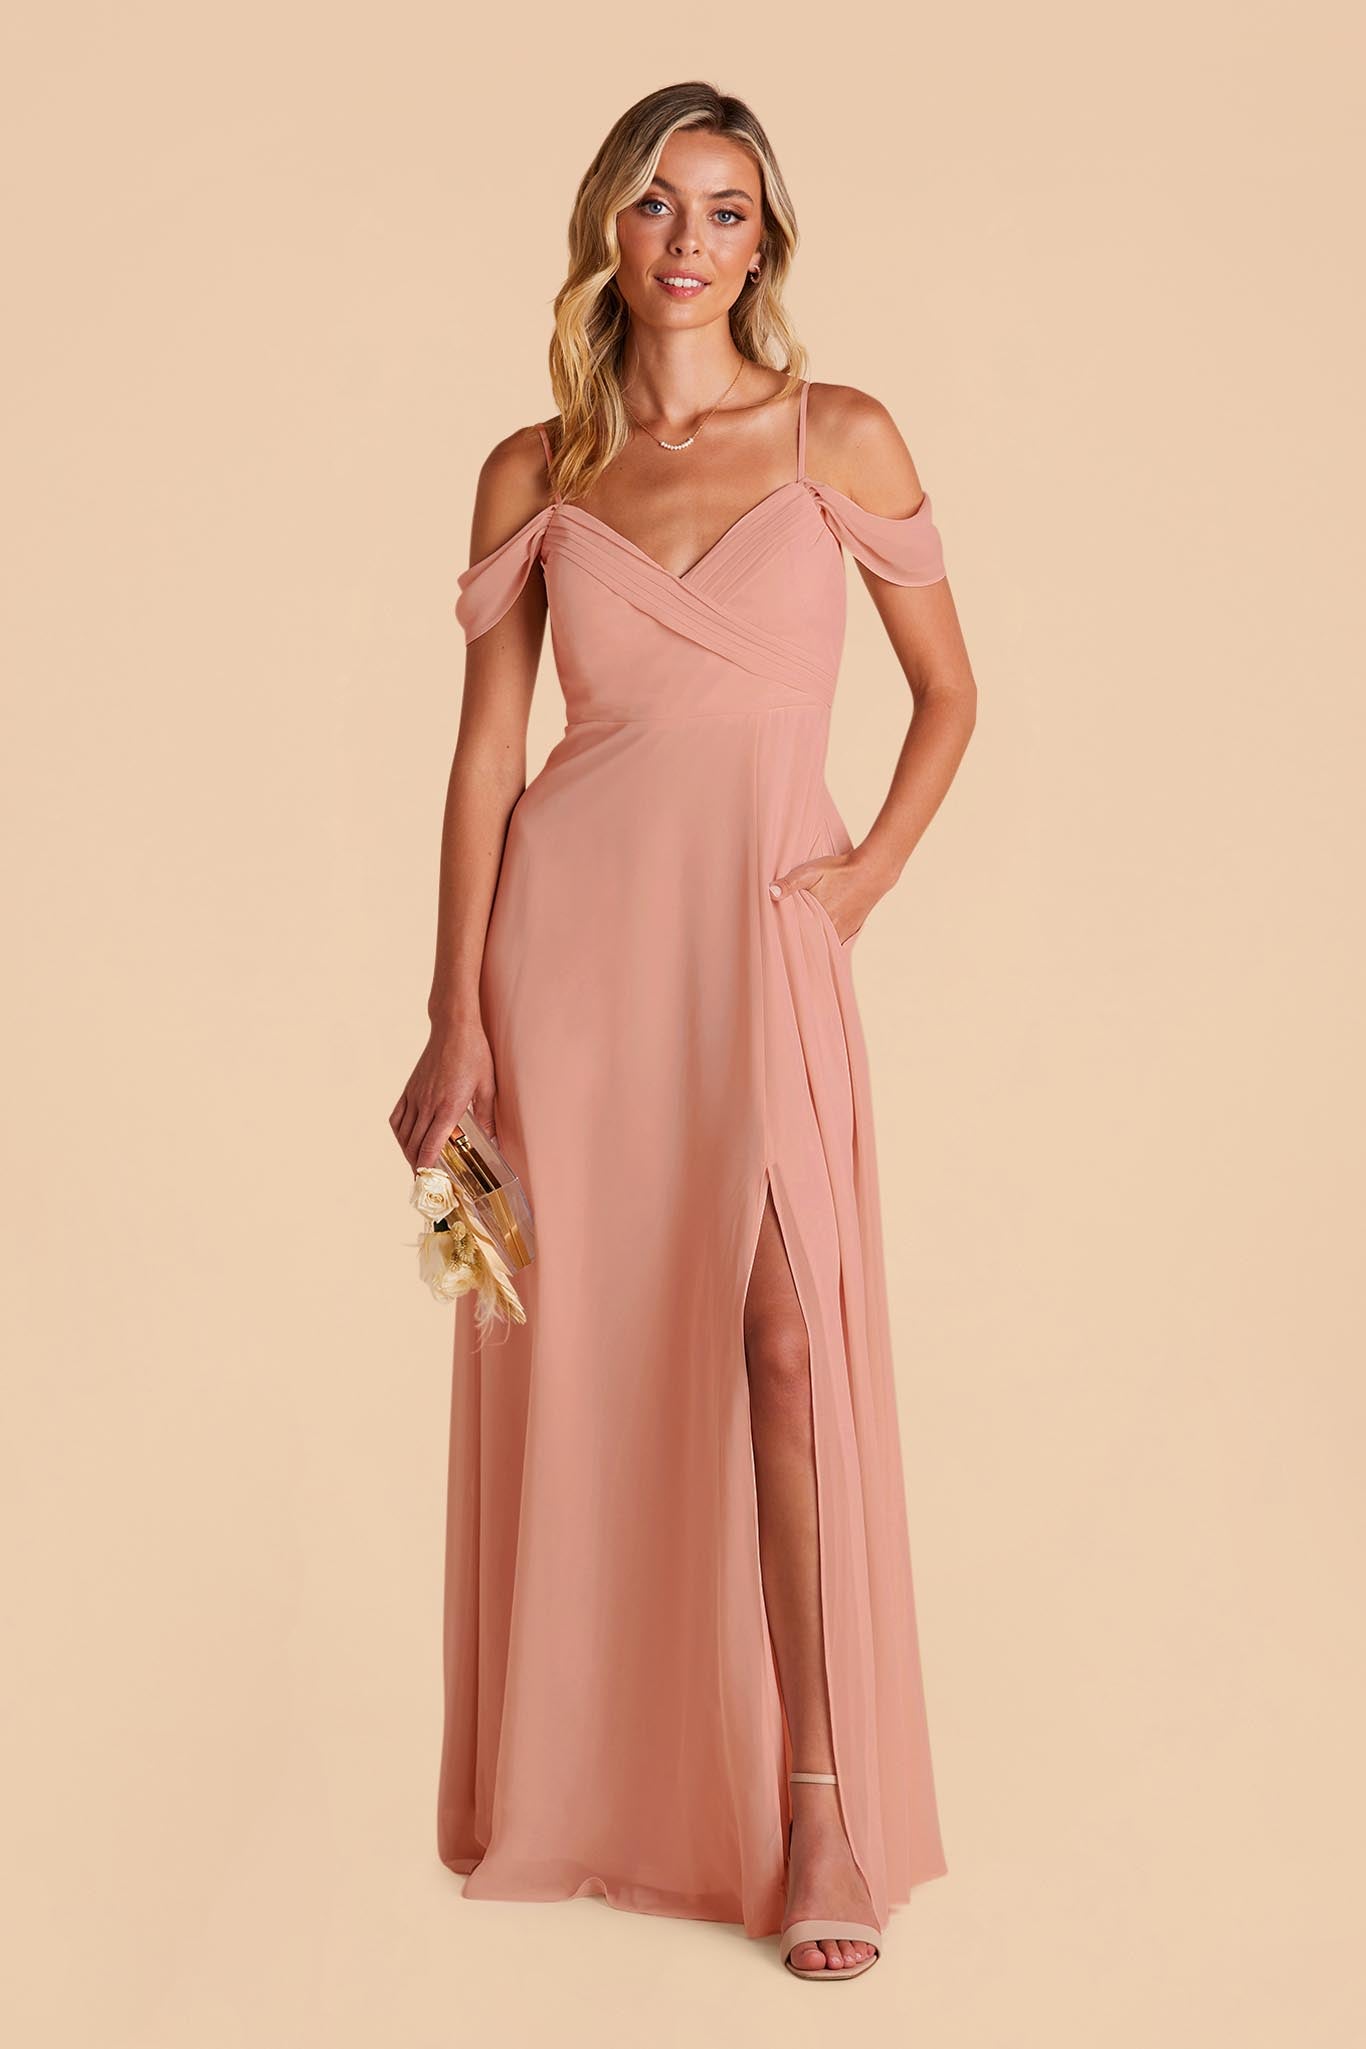 Spence Convertible Dress - Dusty Rose